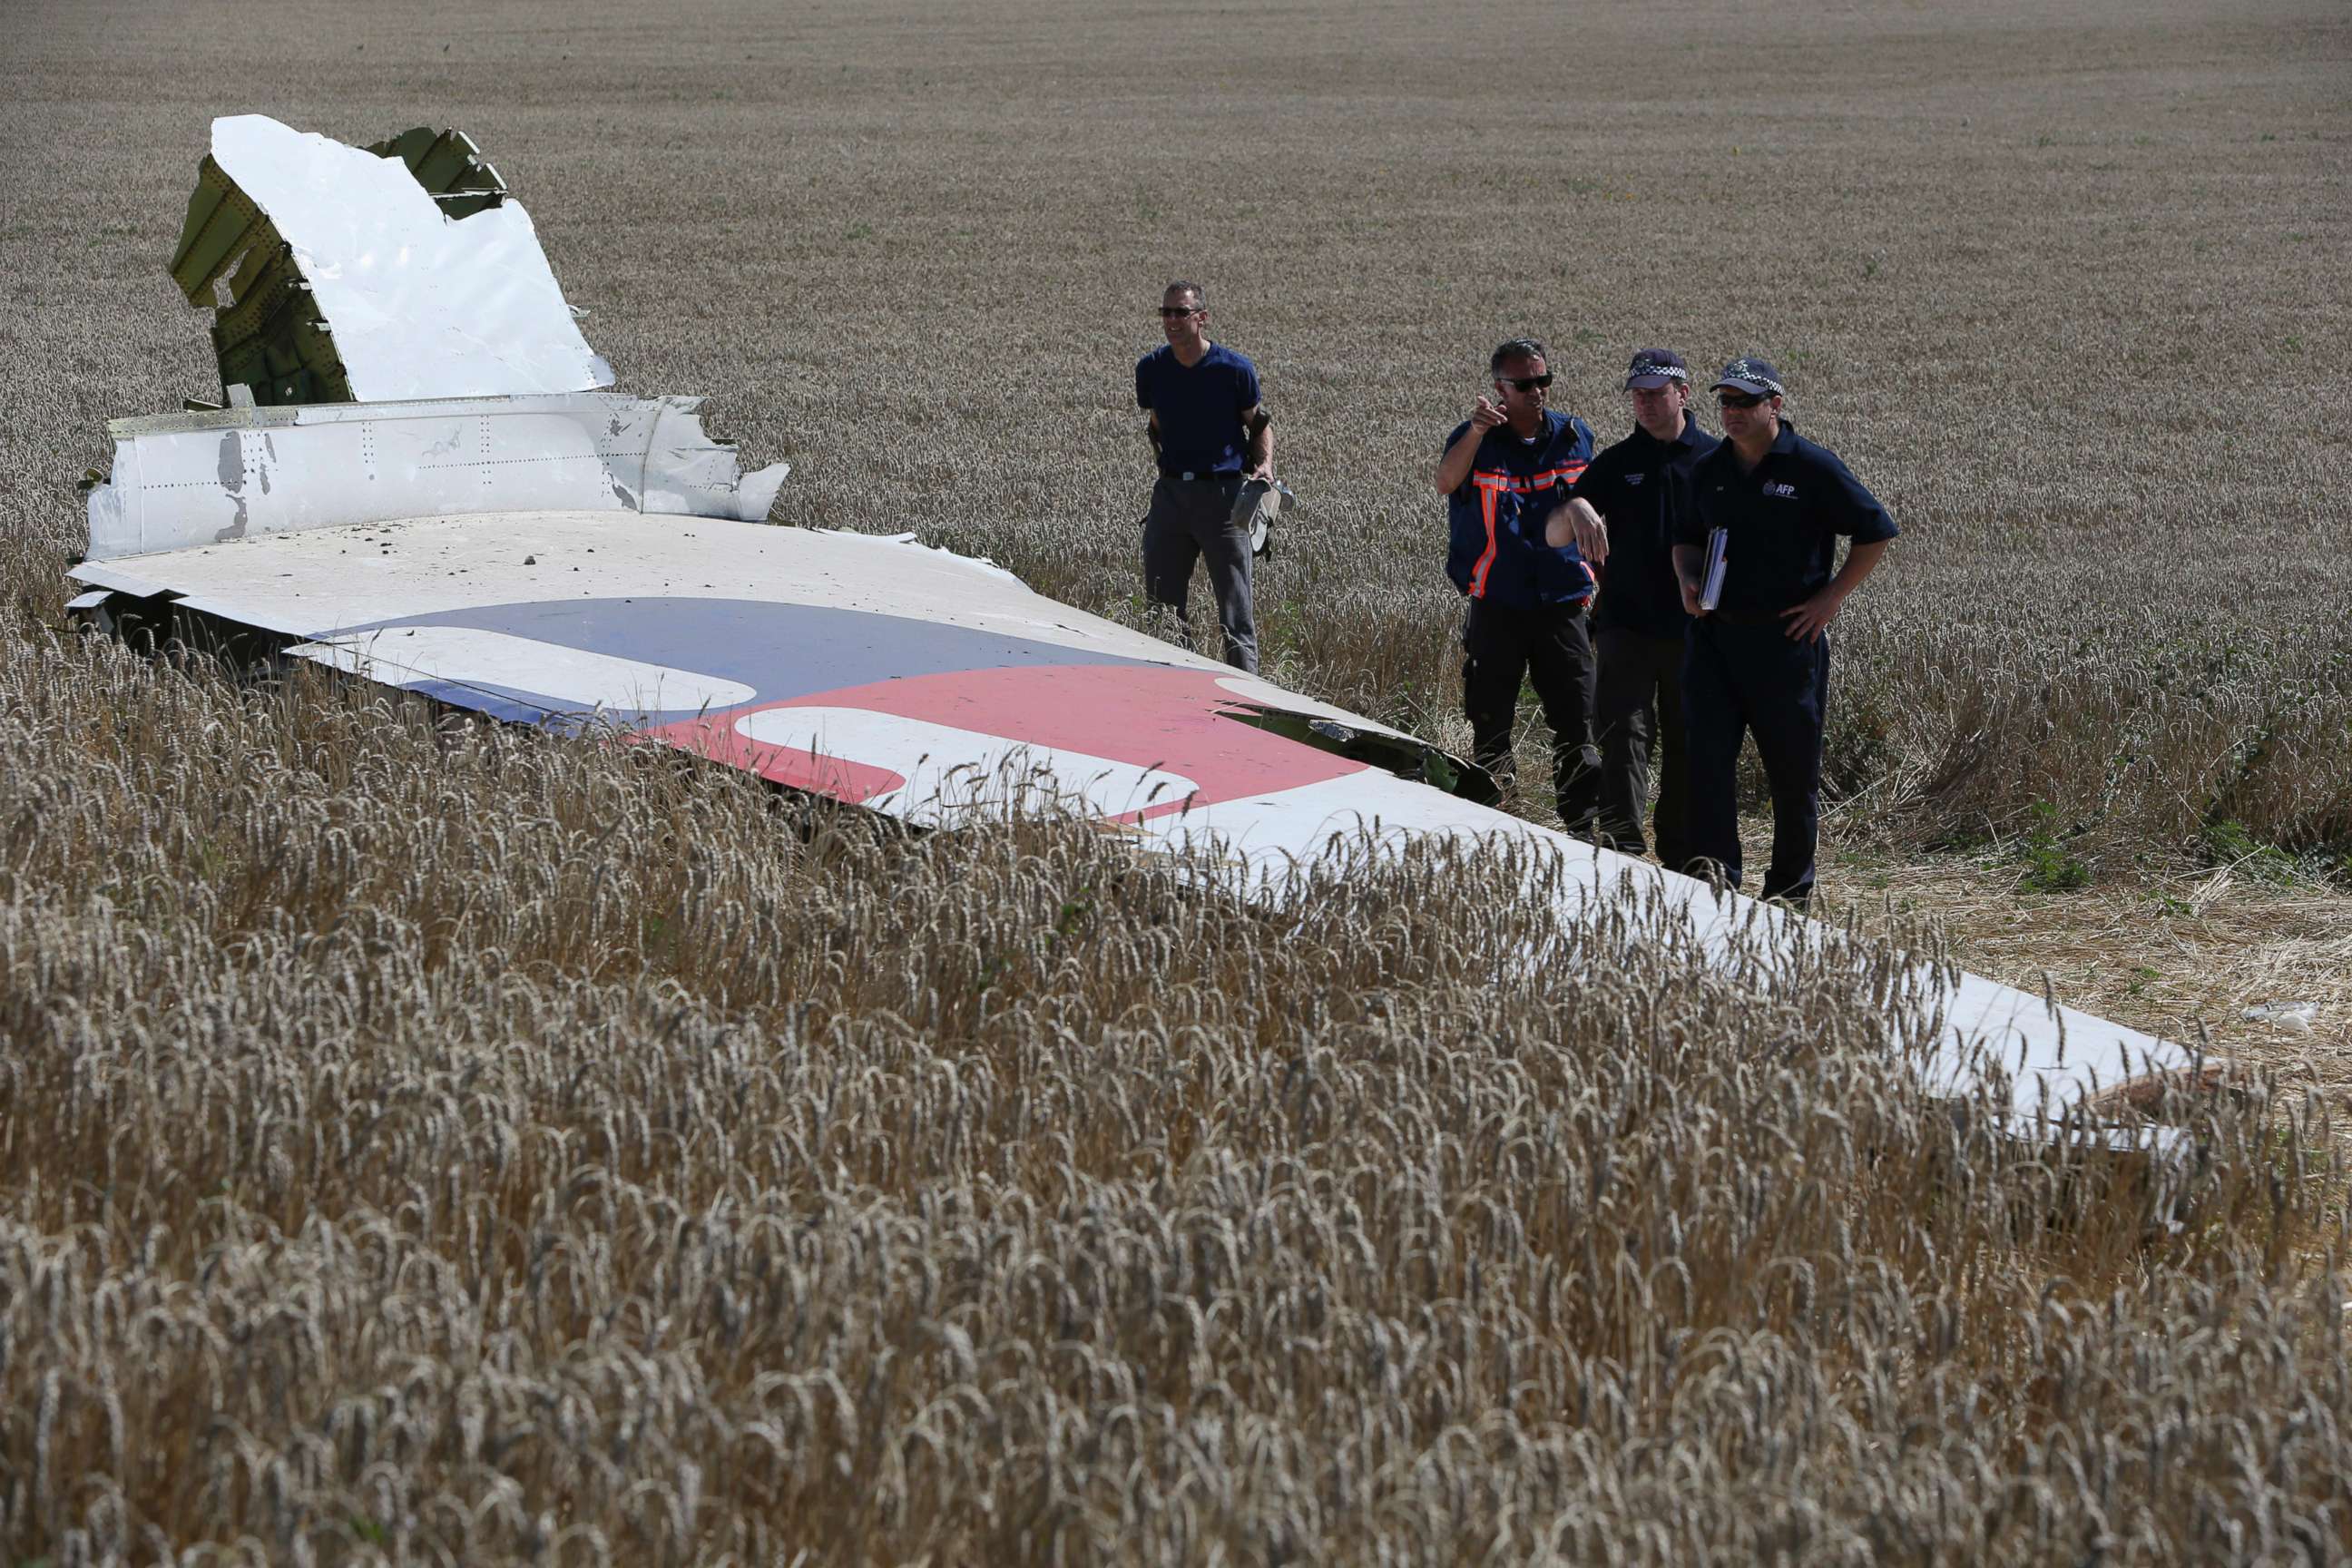 PHOTO: Members of a group of international experts inspect wreckage at the site where the downed Malaysia Airlines flight MH17 crashed in eastern Ukraine, Aug. 1, 2014.